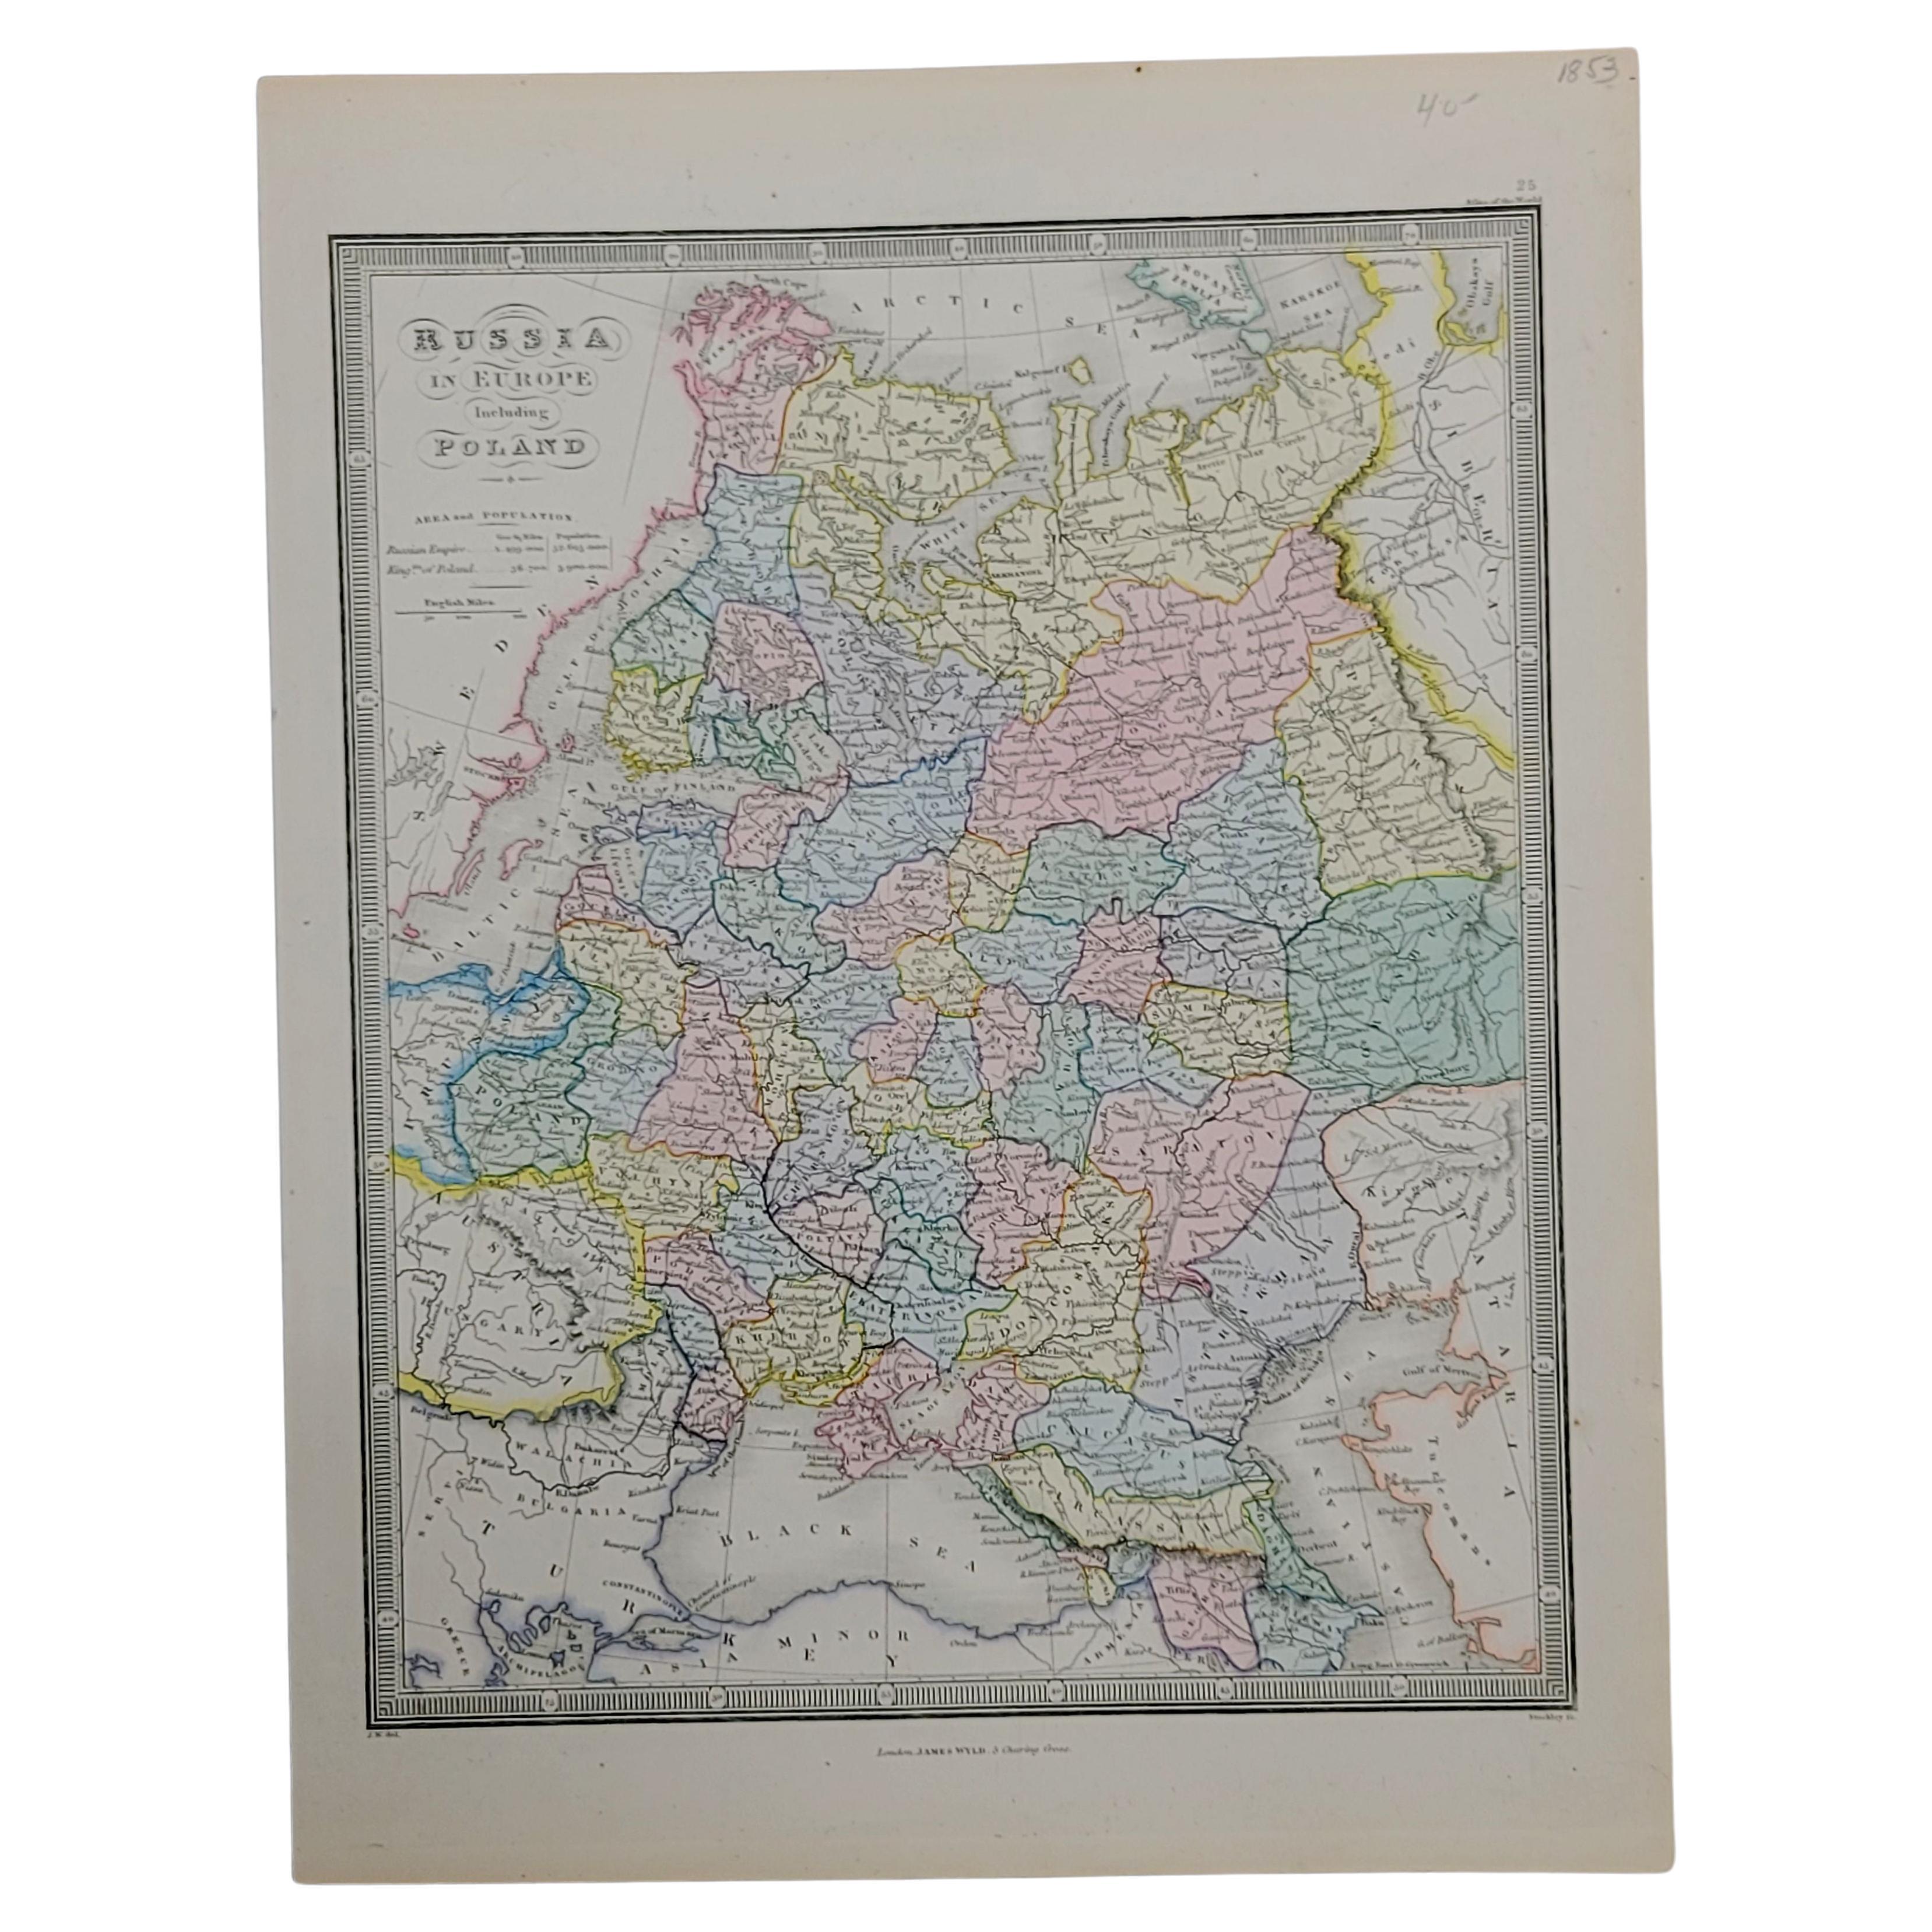 1853 Map of "Russia in Europe Including Poland" Ric.r016 For Sale